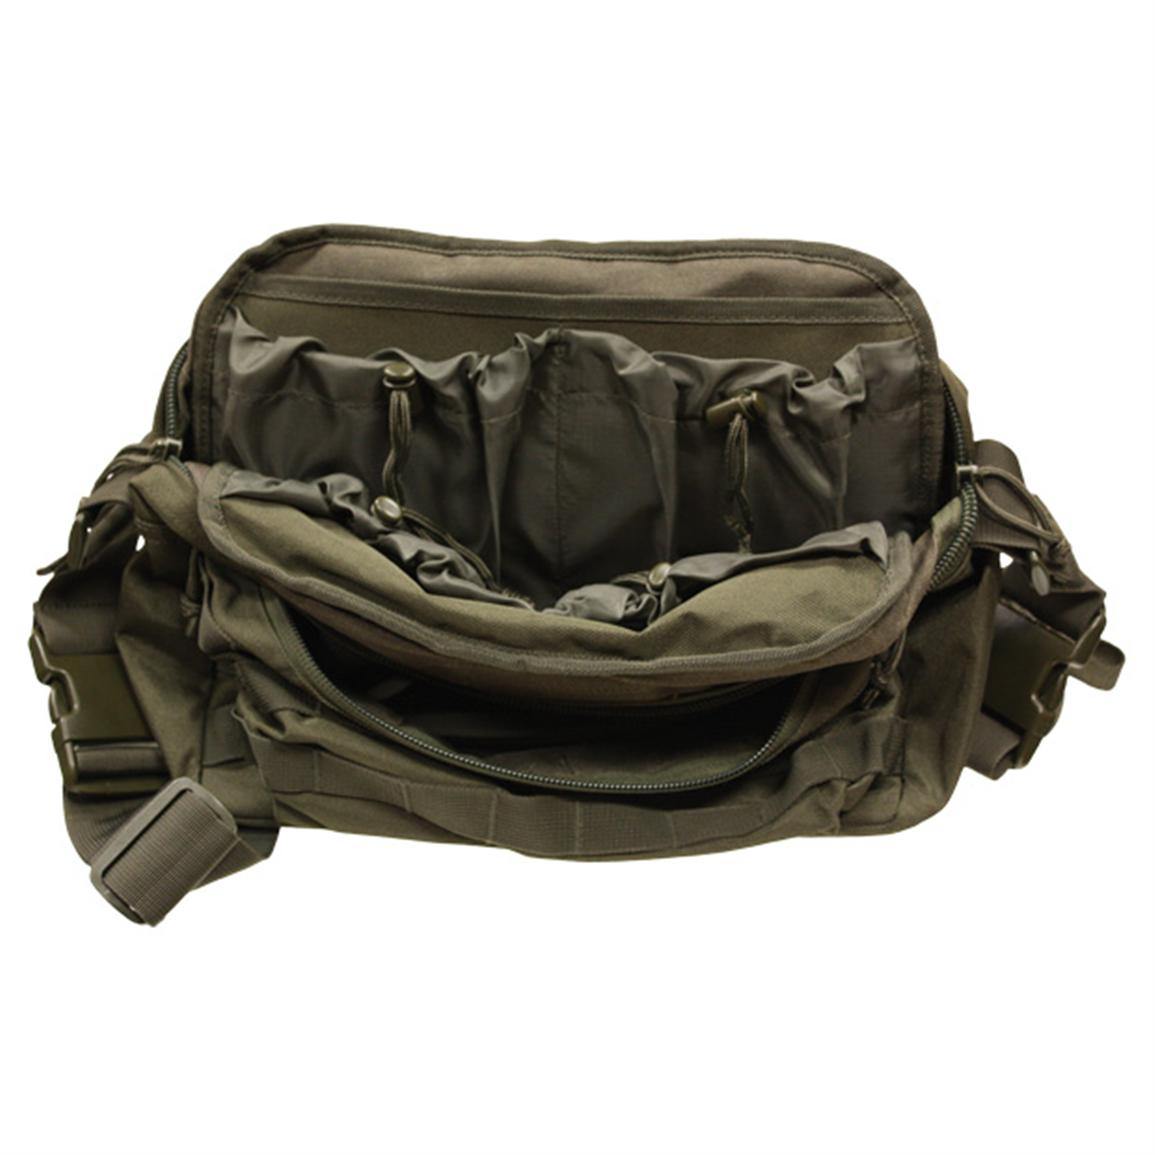 Red Rock Outdoor Gear™ Ammo Carry Bag - 299875, Military Style ...